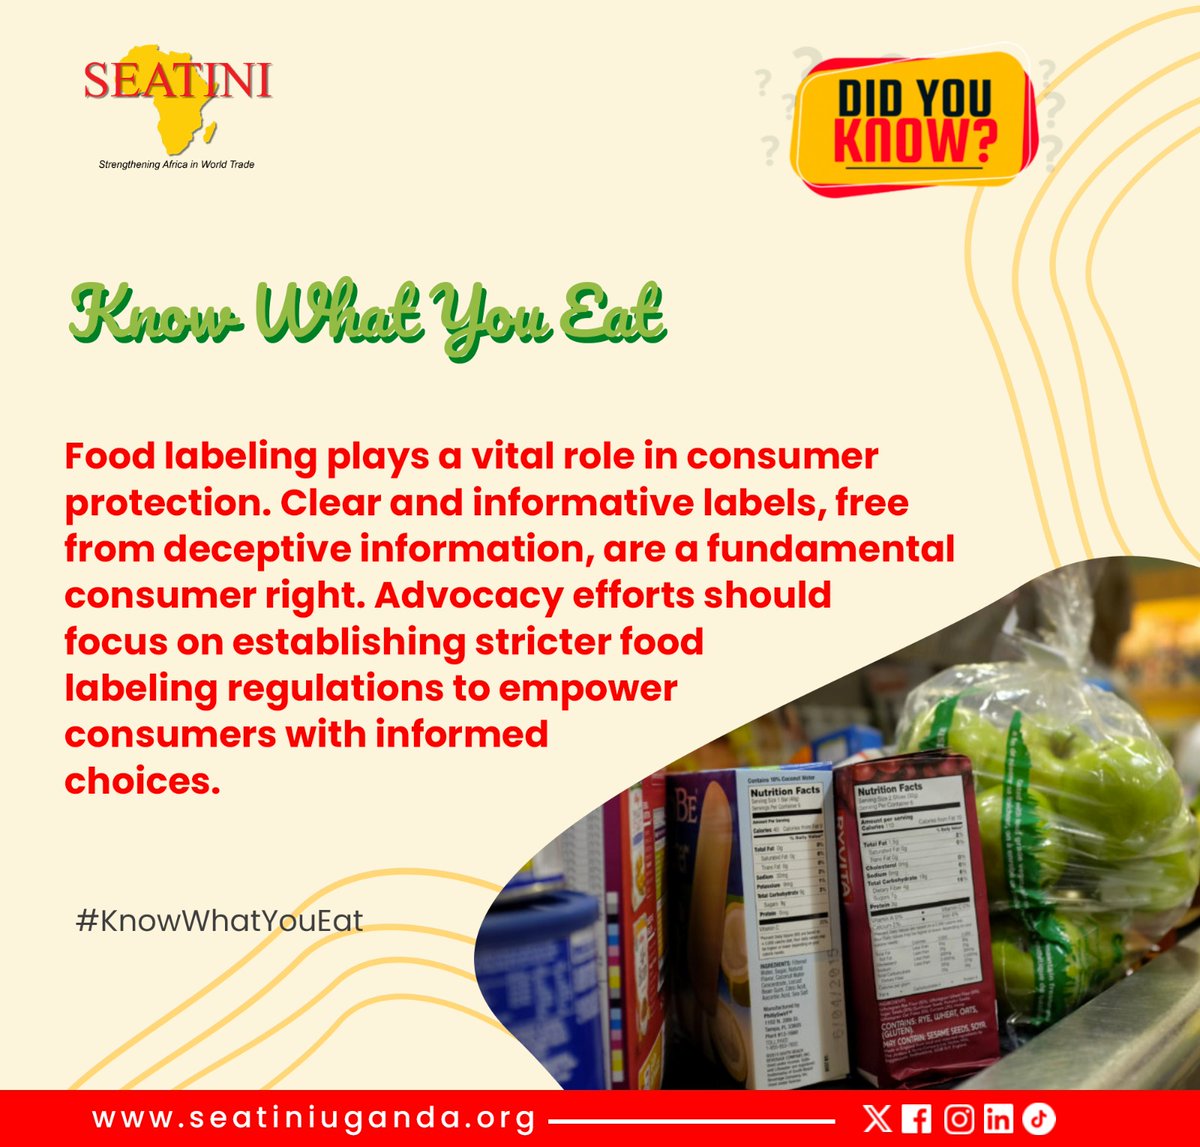 Did you know?

Food labeling plays a vital role in consumer protection. Clear informative labels, free from deceptive information, are a fundermental consumer right.  
#KnowWhatYouEat